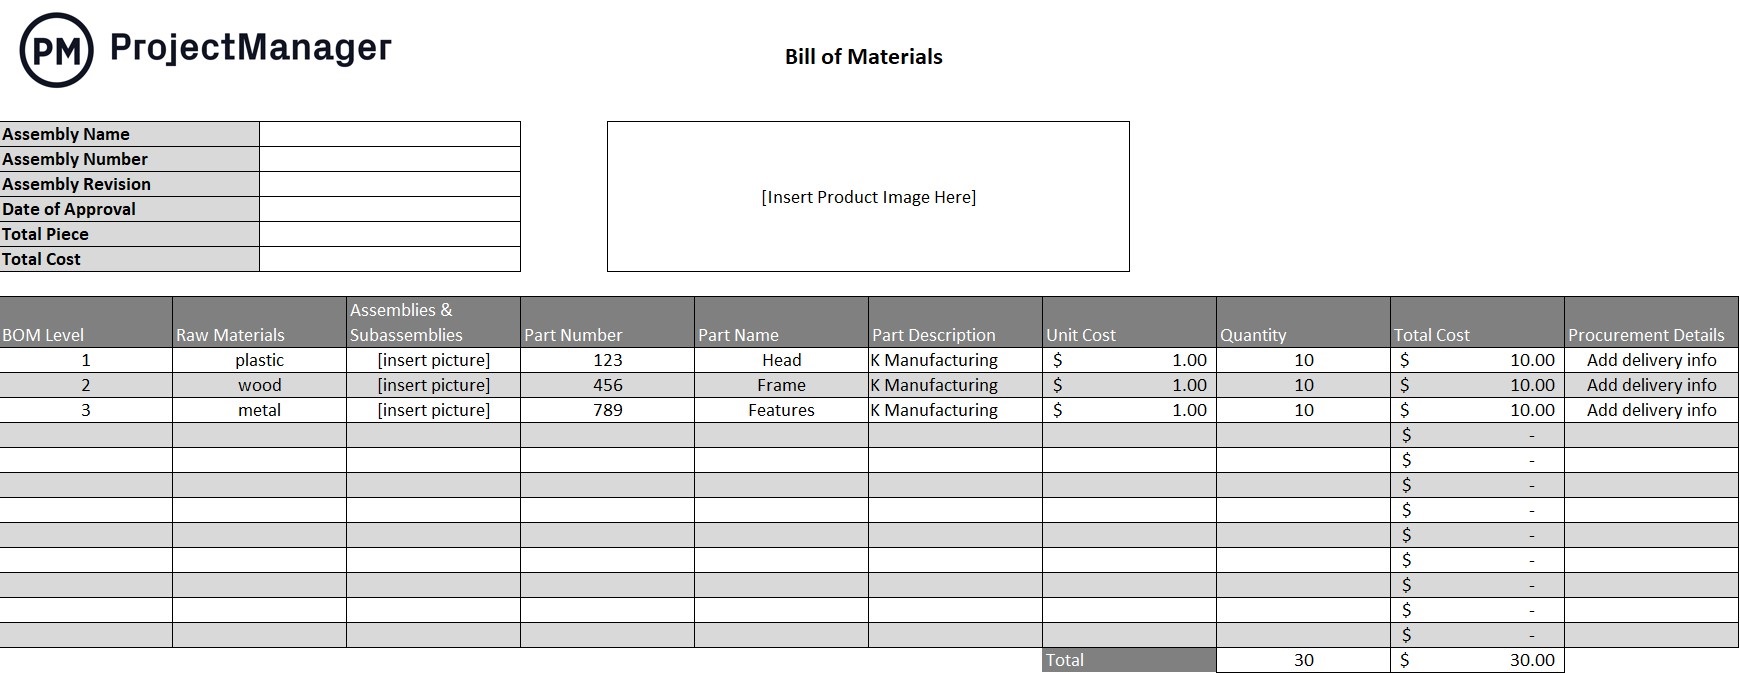 ProjectManager's bill of materials template